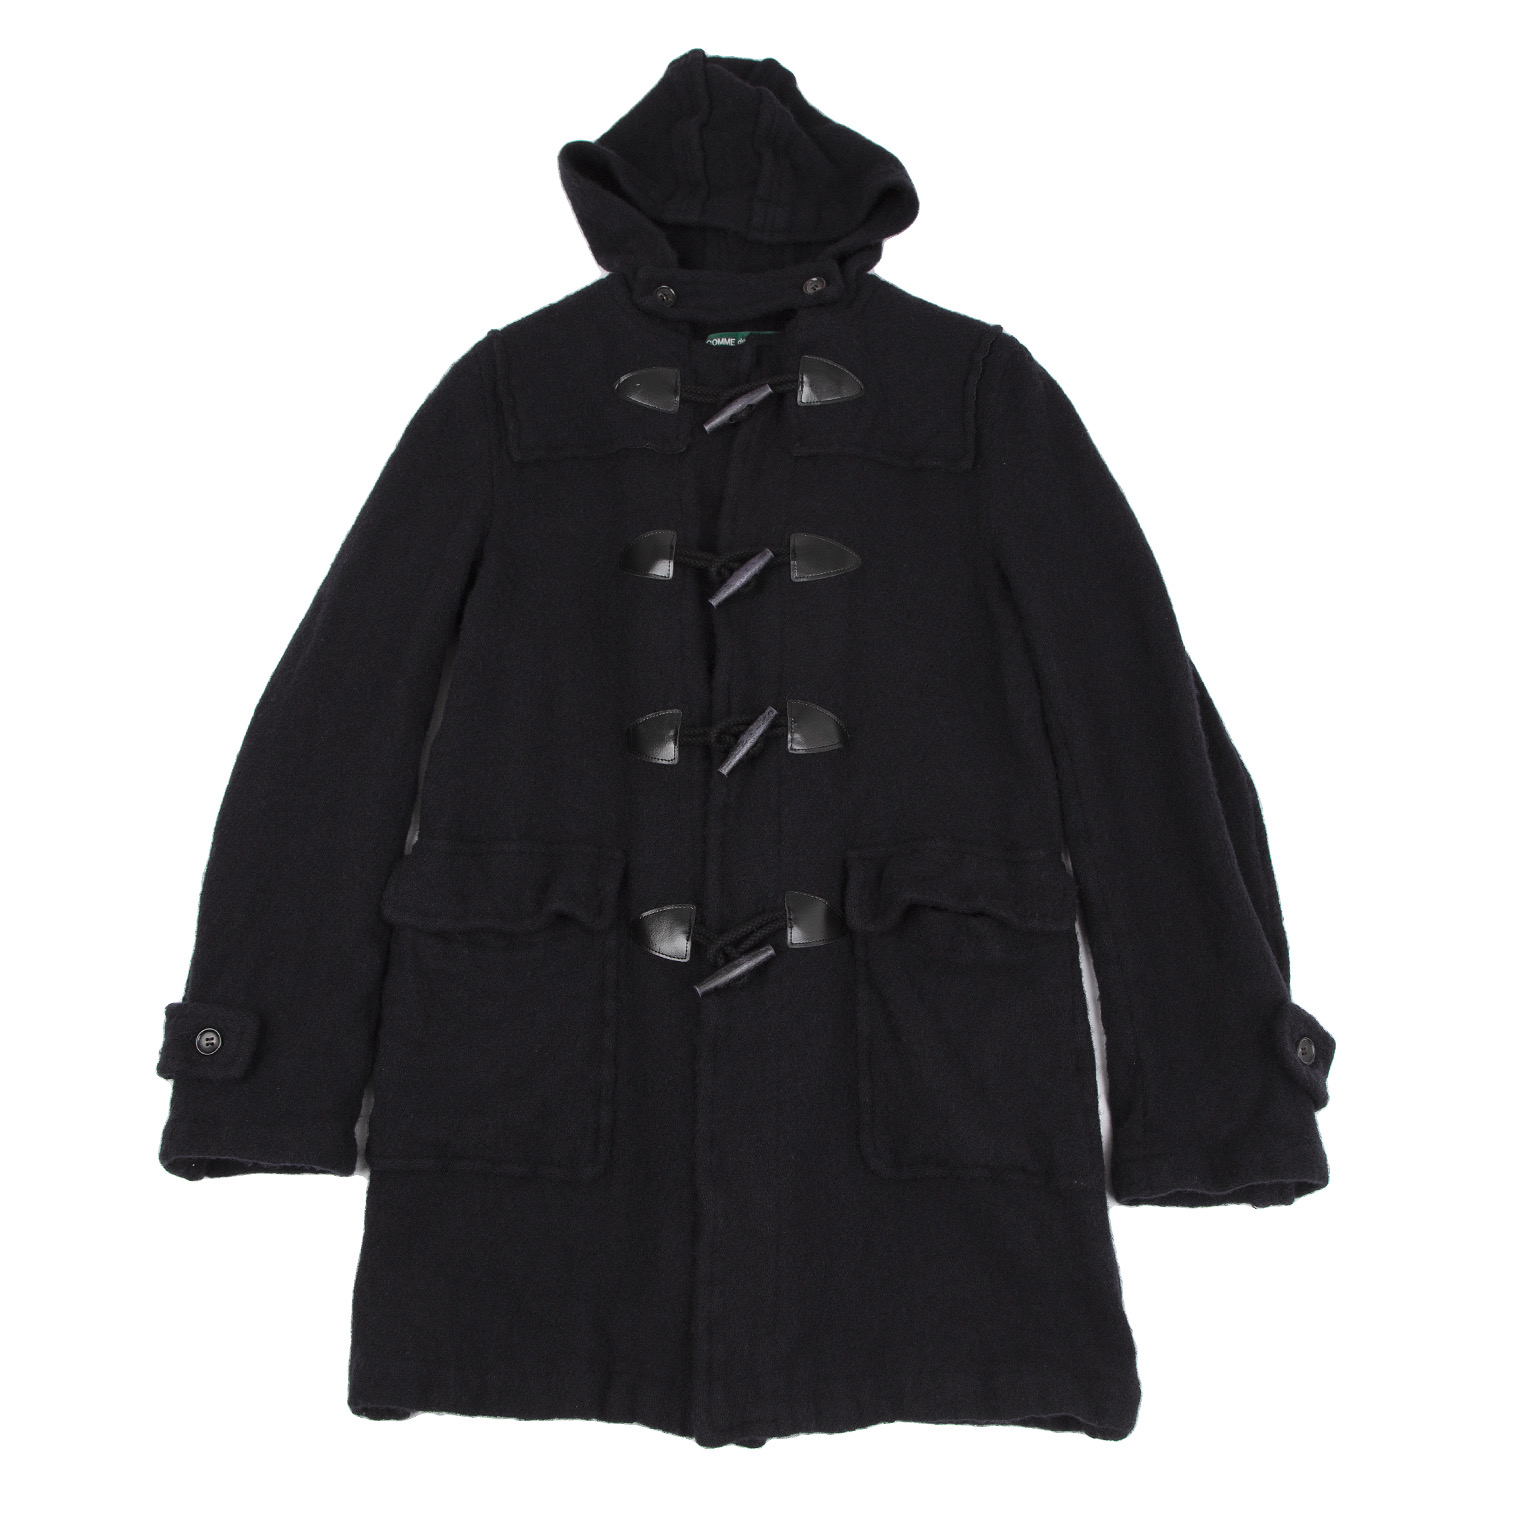 COMME des GARCONS HOMME PLUS ウールダッフルコート - ダッフルコート